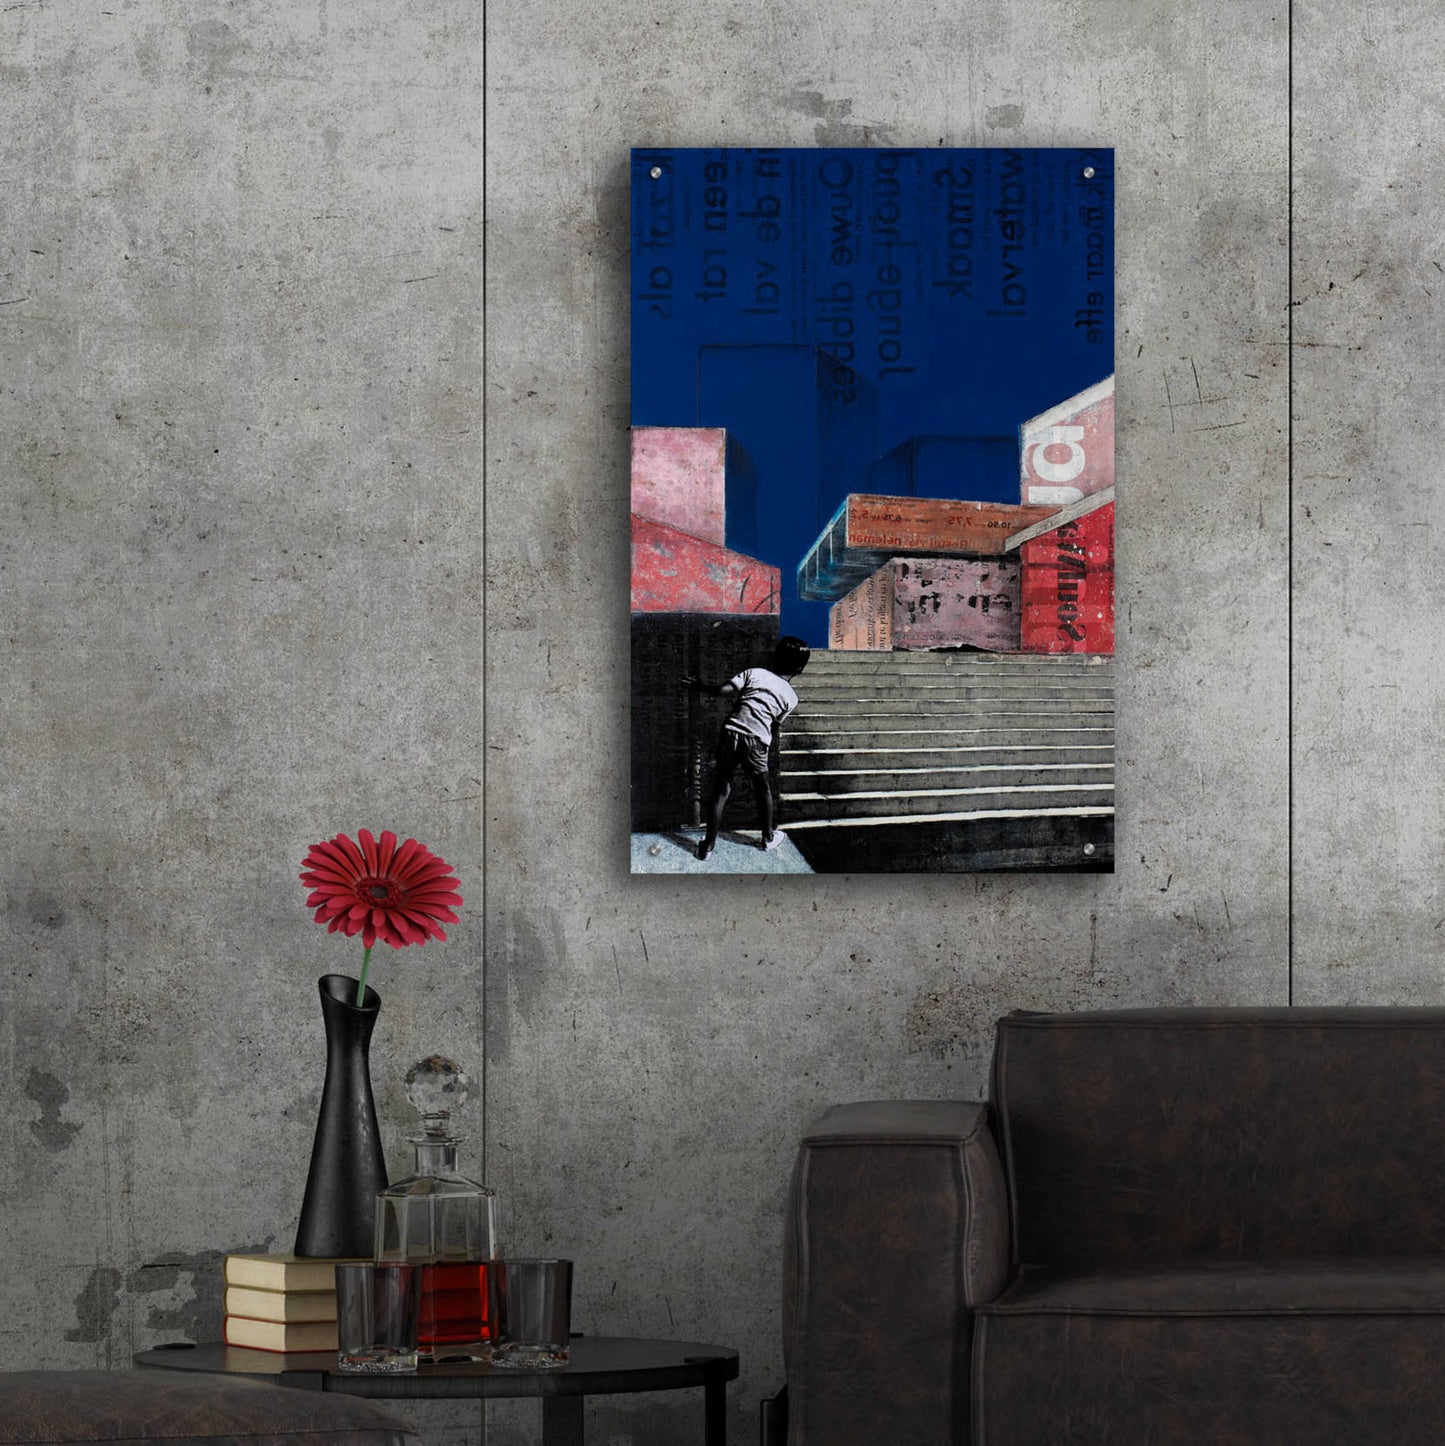 Epic Art 'THE BLUE BUILDINGS' by DB Waterman,24x36